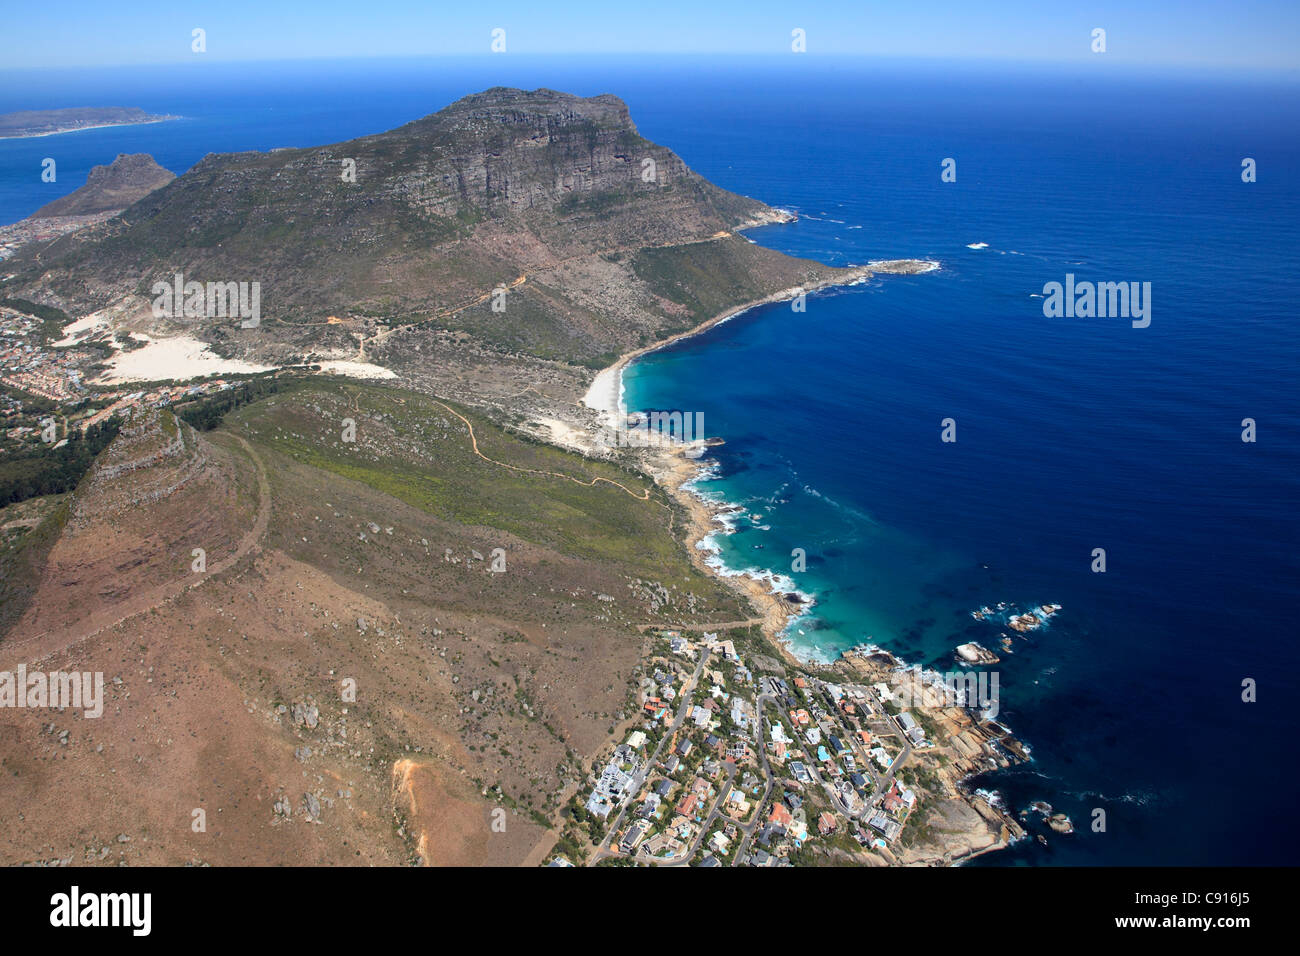 Table Mountain National Park previously known as the Cape Peninsula National Park incorporates the Cape Peninsula,which is the Stock Photo